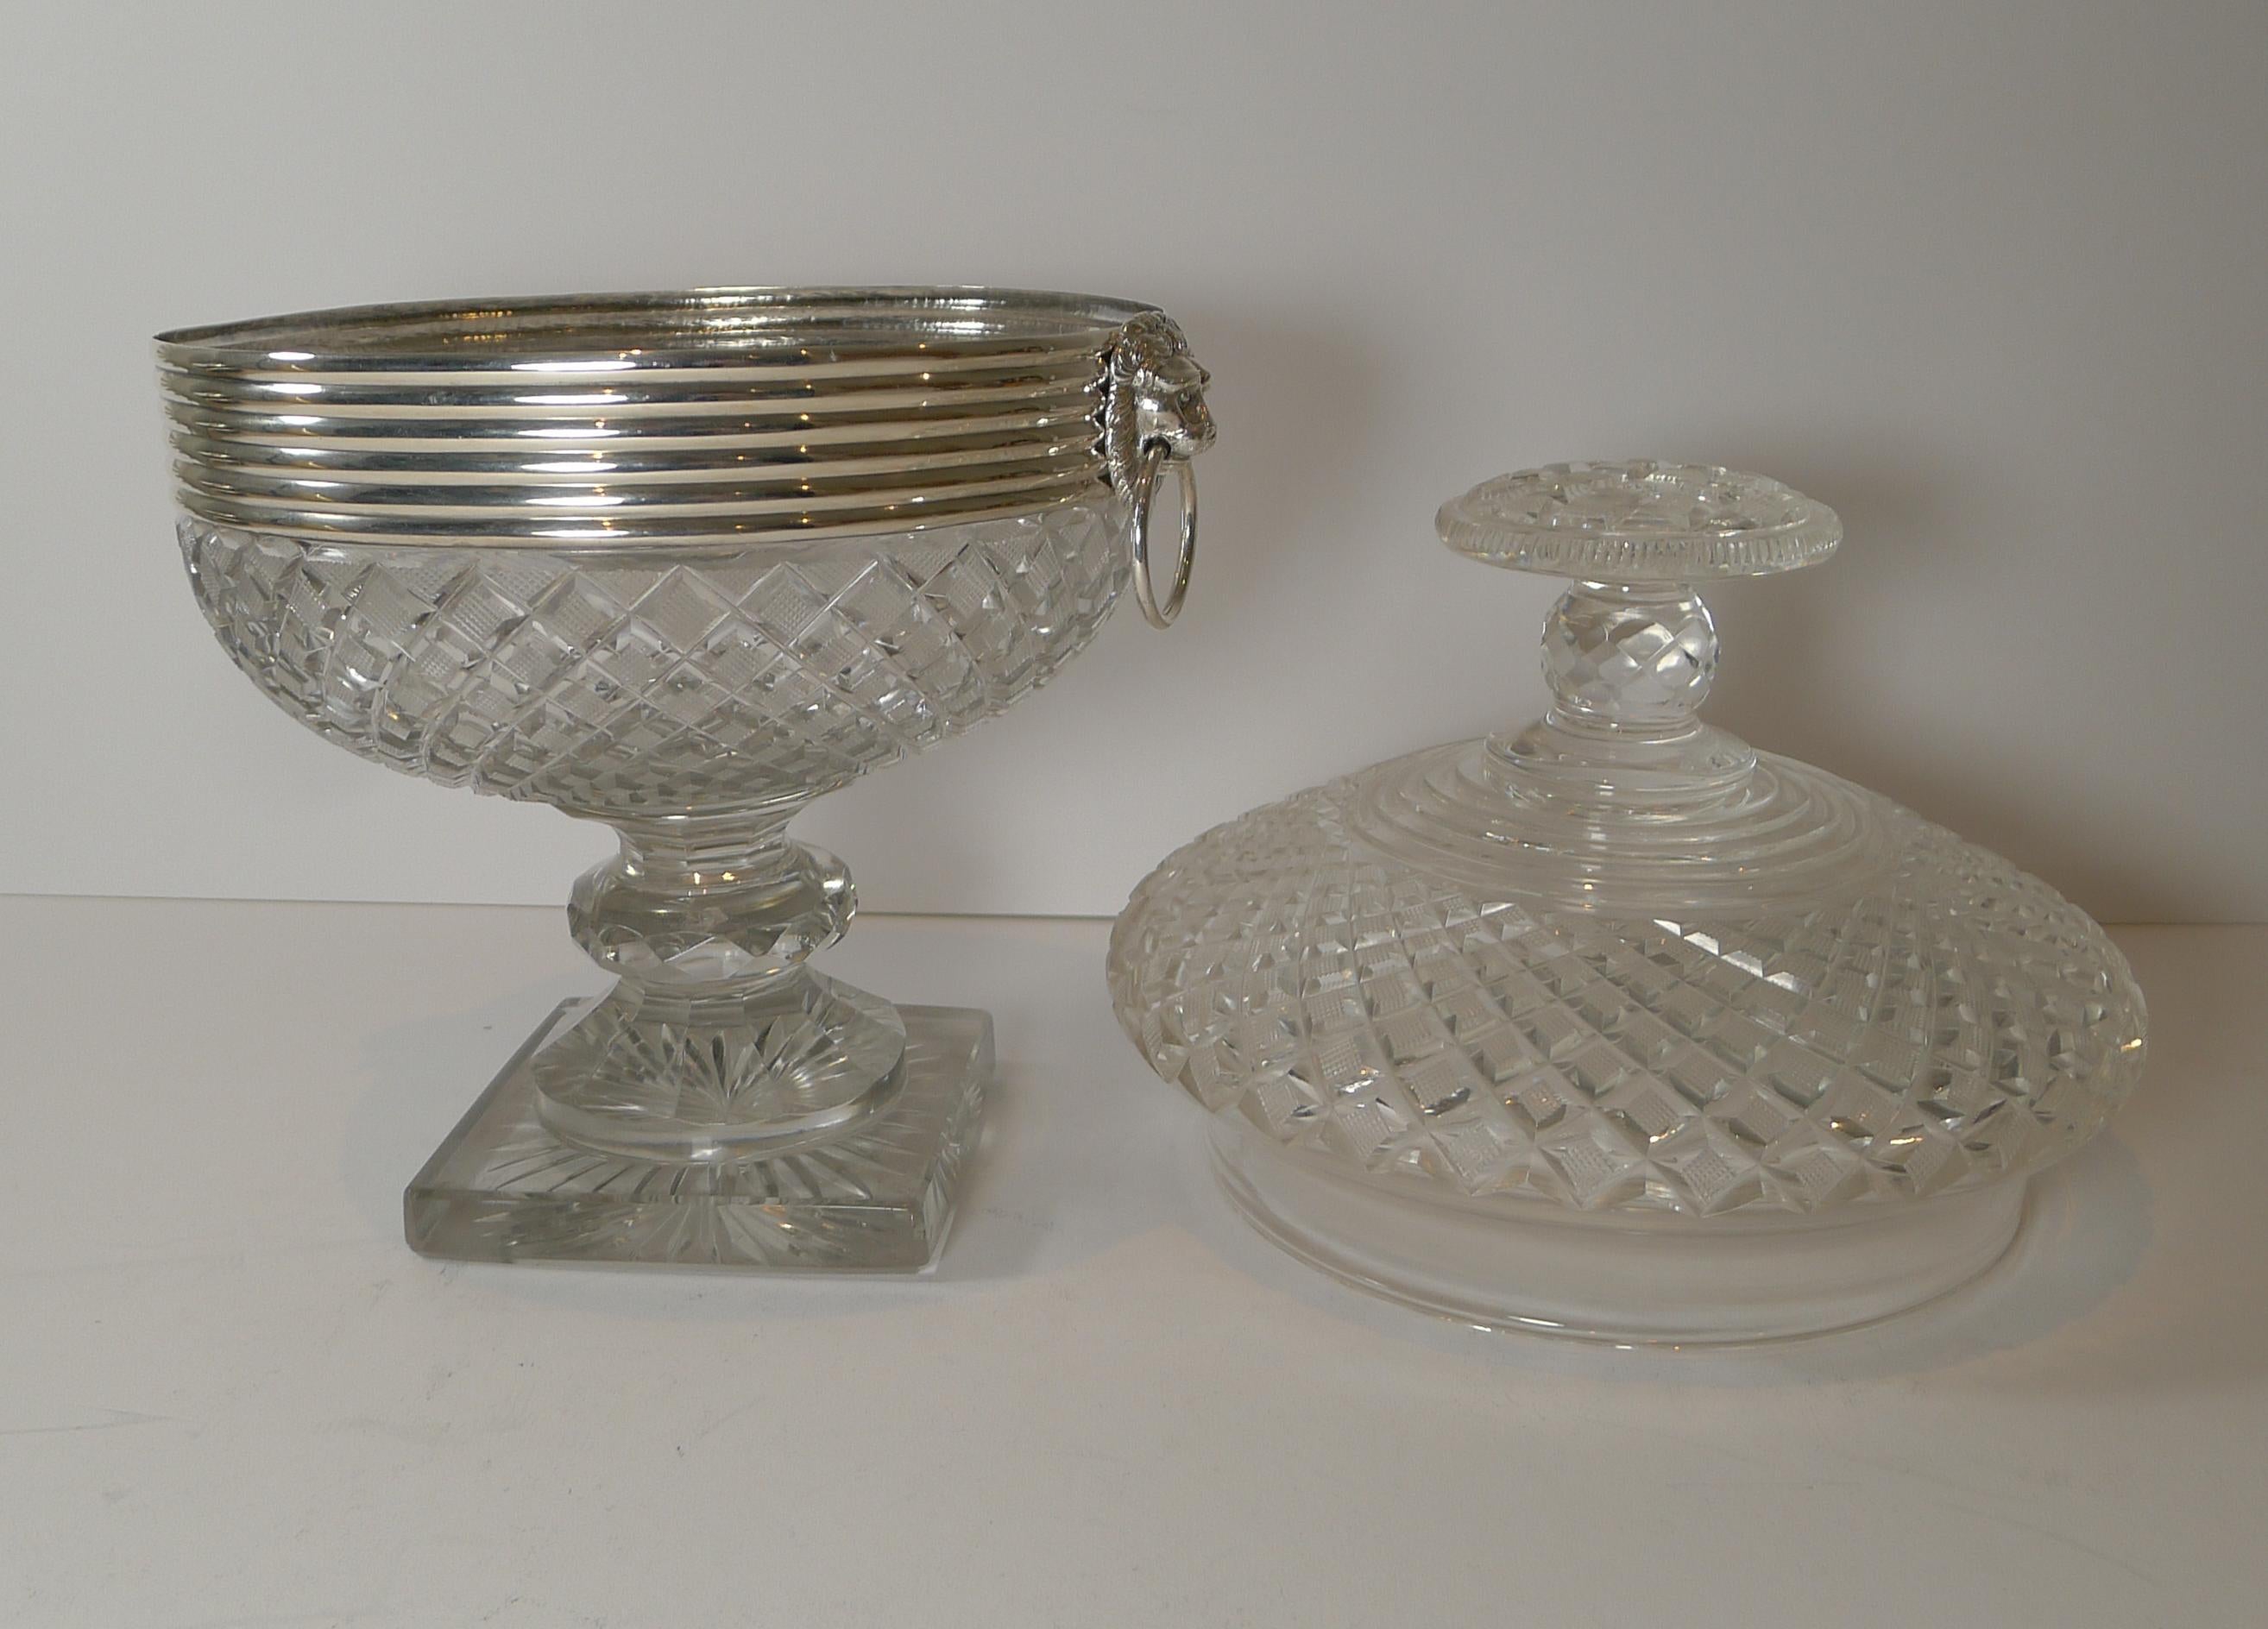 Grand Cut Crystal & Dutch Silver Covered Sweet / Candy Bowl c.1880 For Sale 8